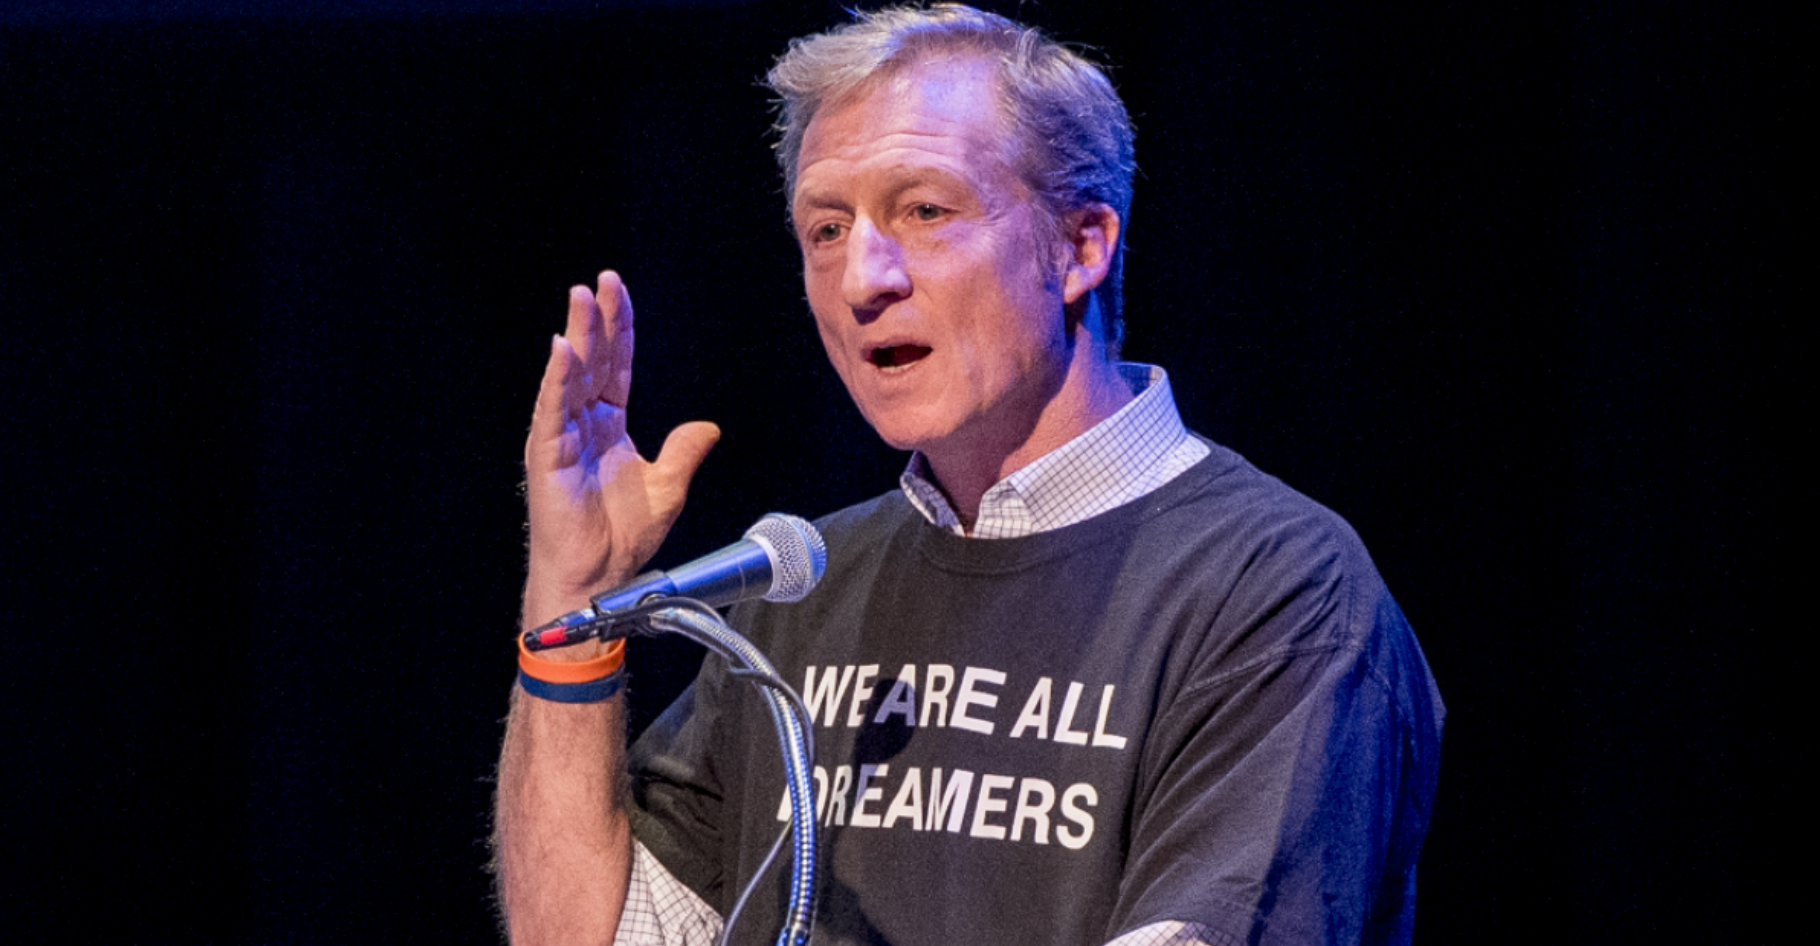 Steyer: Maybe We Can Have a 'Nuclear War' to Provide a 'Real Course Correction' to Trump